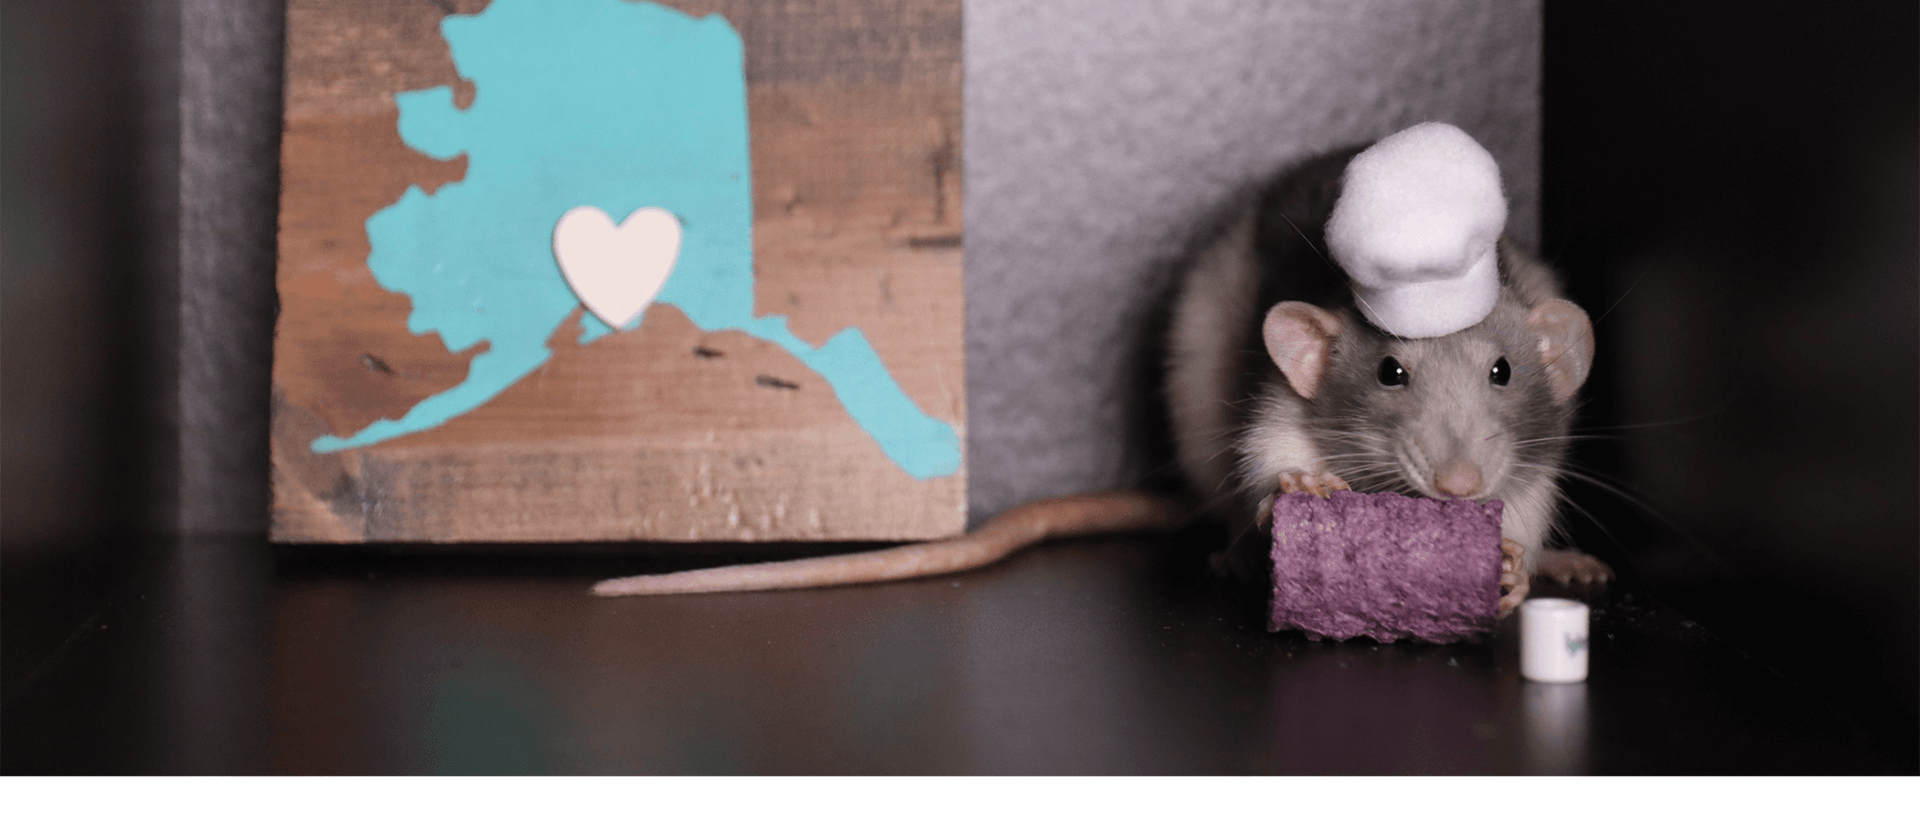 rat in a hat eating a treat